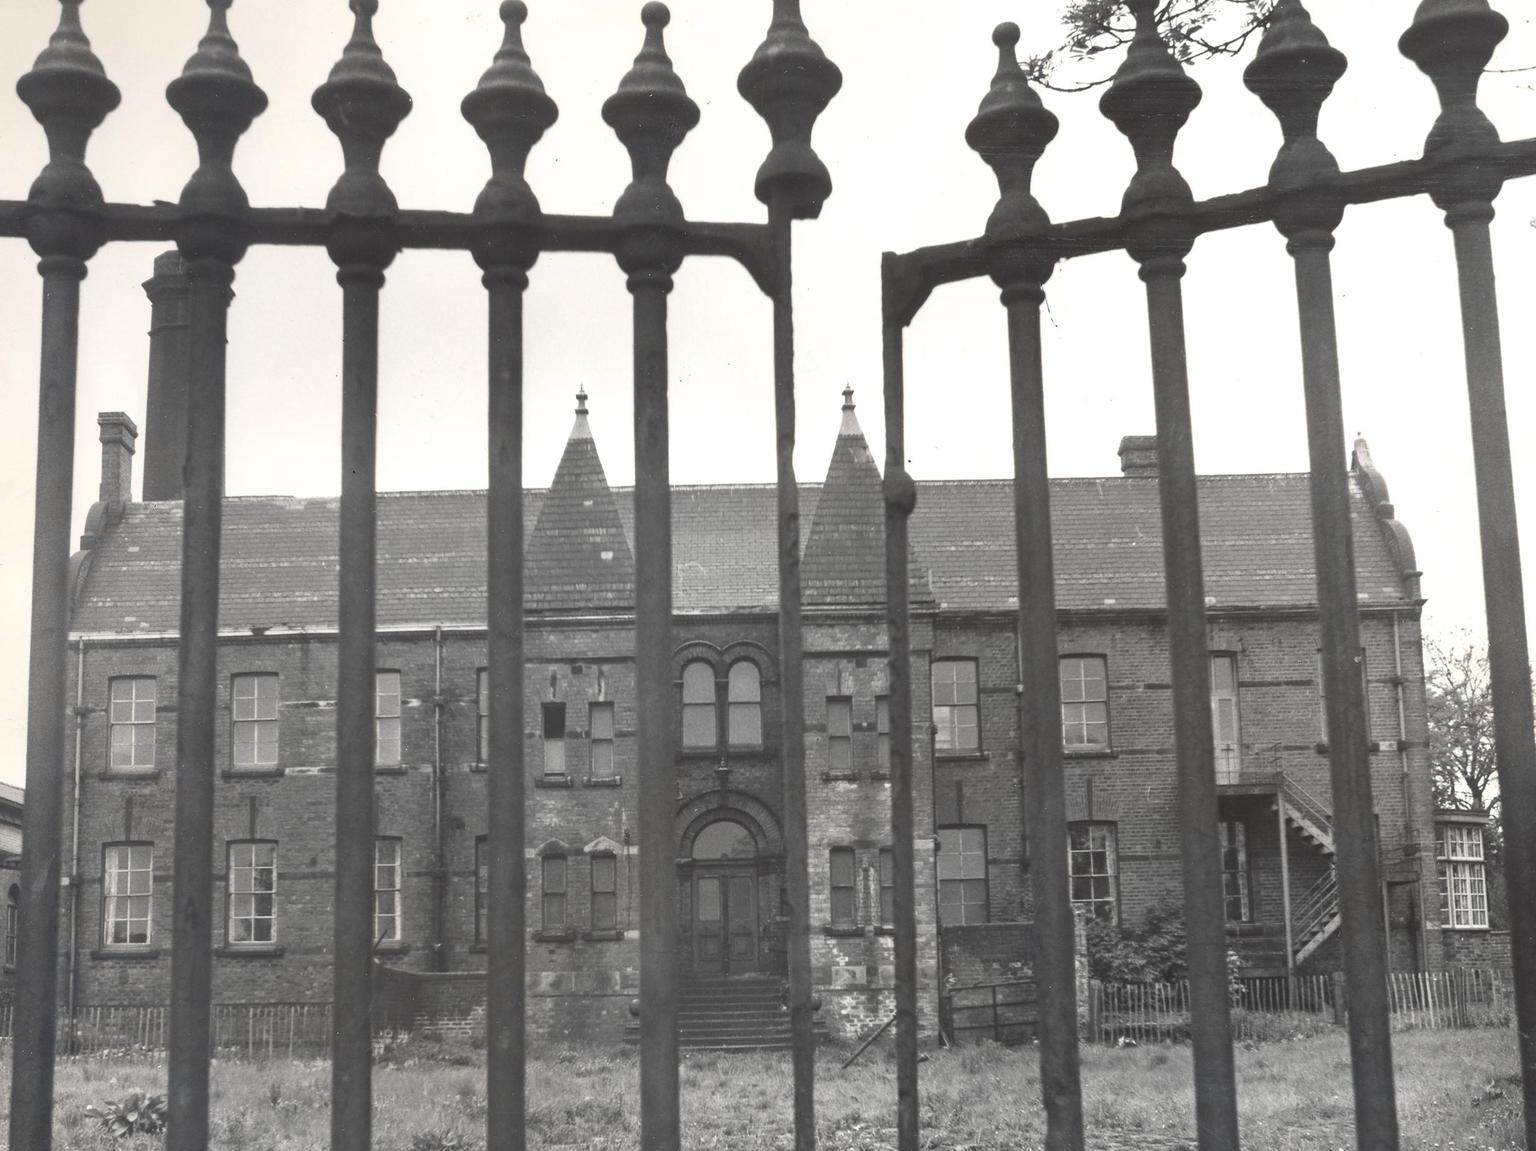 South Lodge, Holbeck. This was originally built as a poor law institution - a 'workhouse' in the language of its Victorian origin.